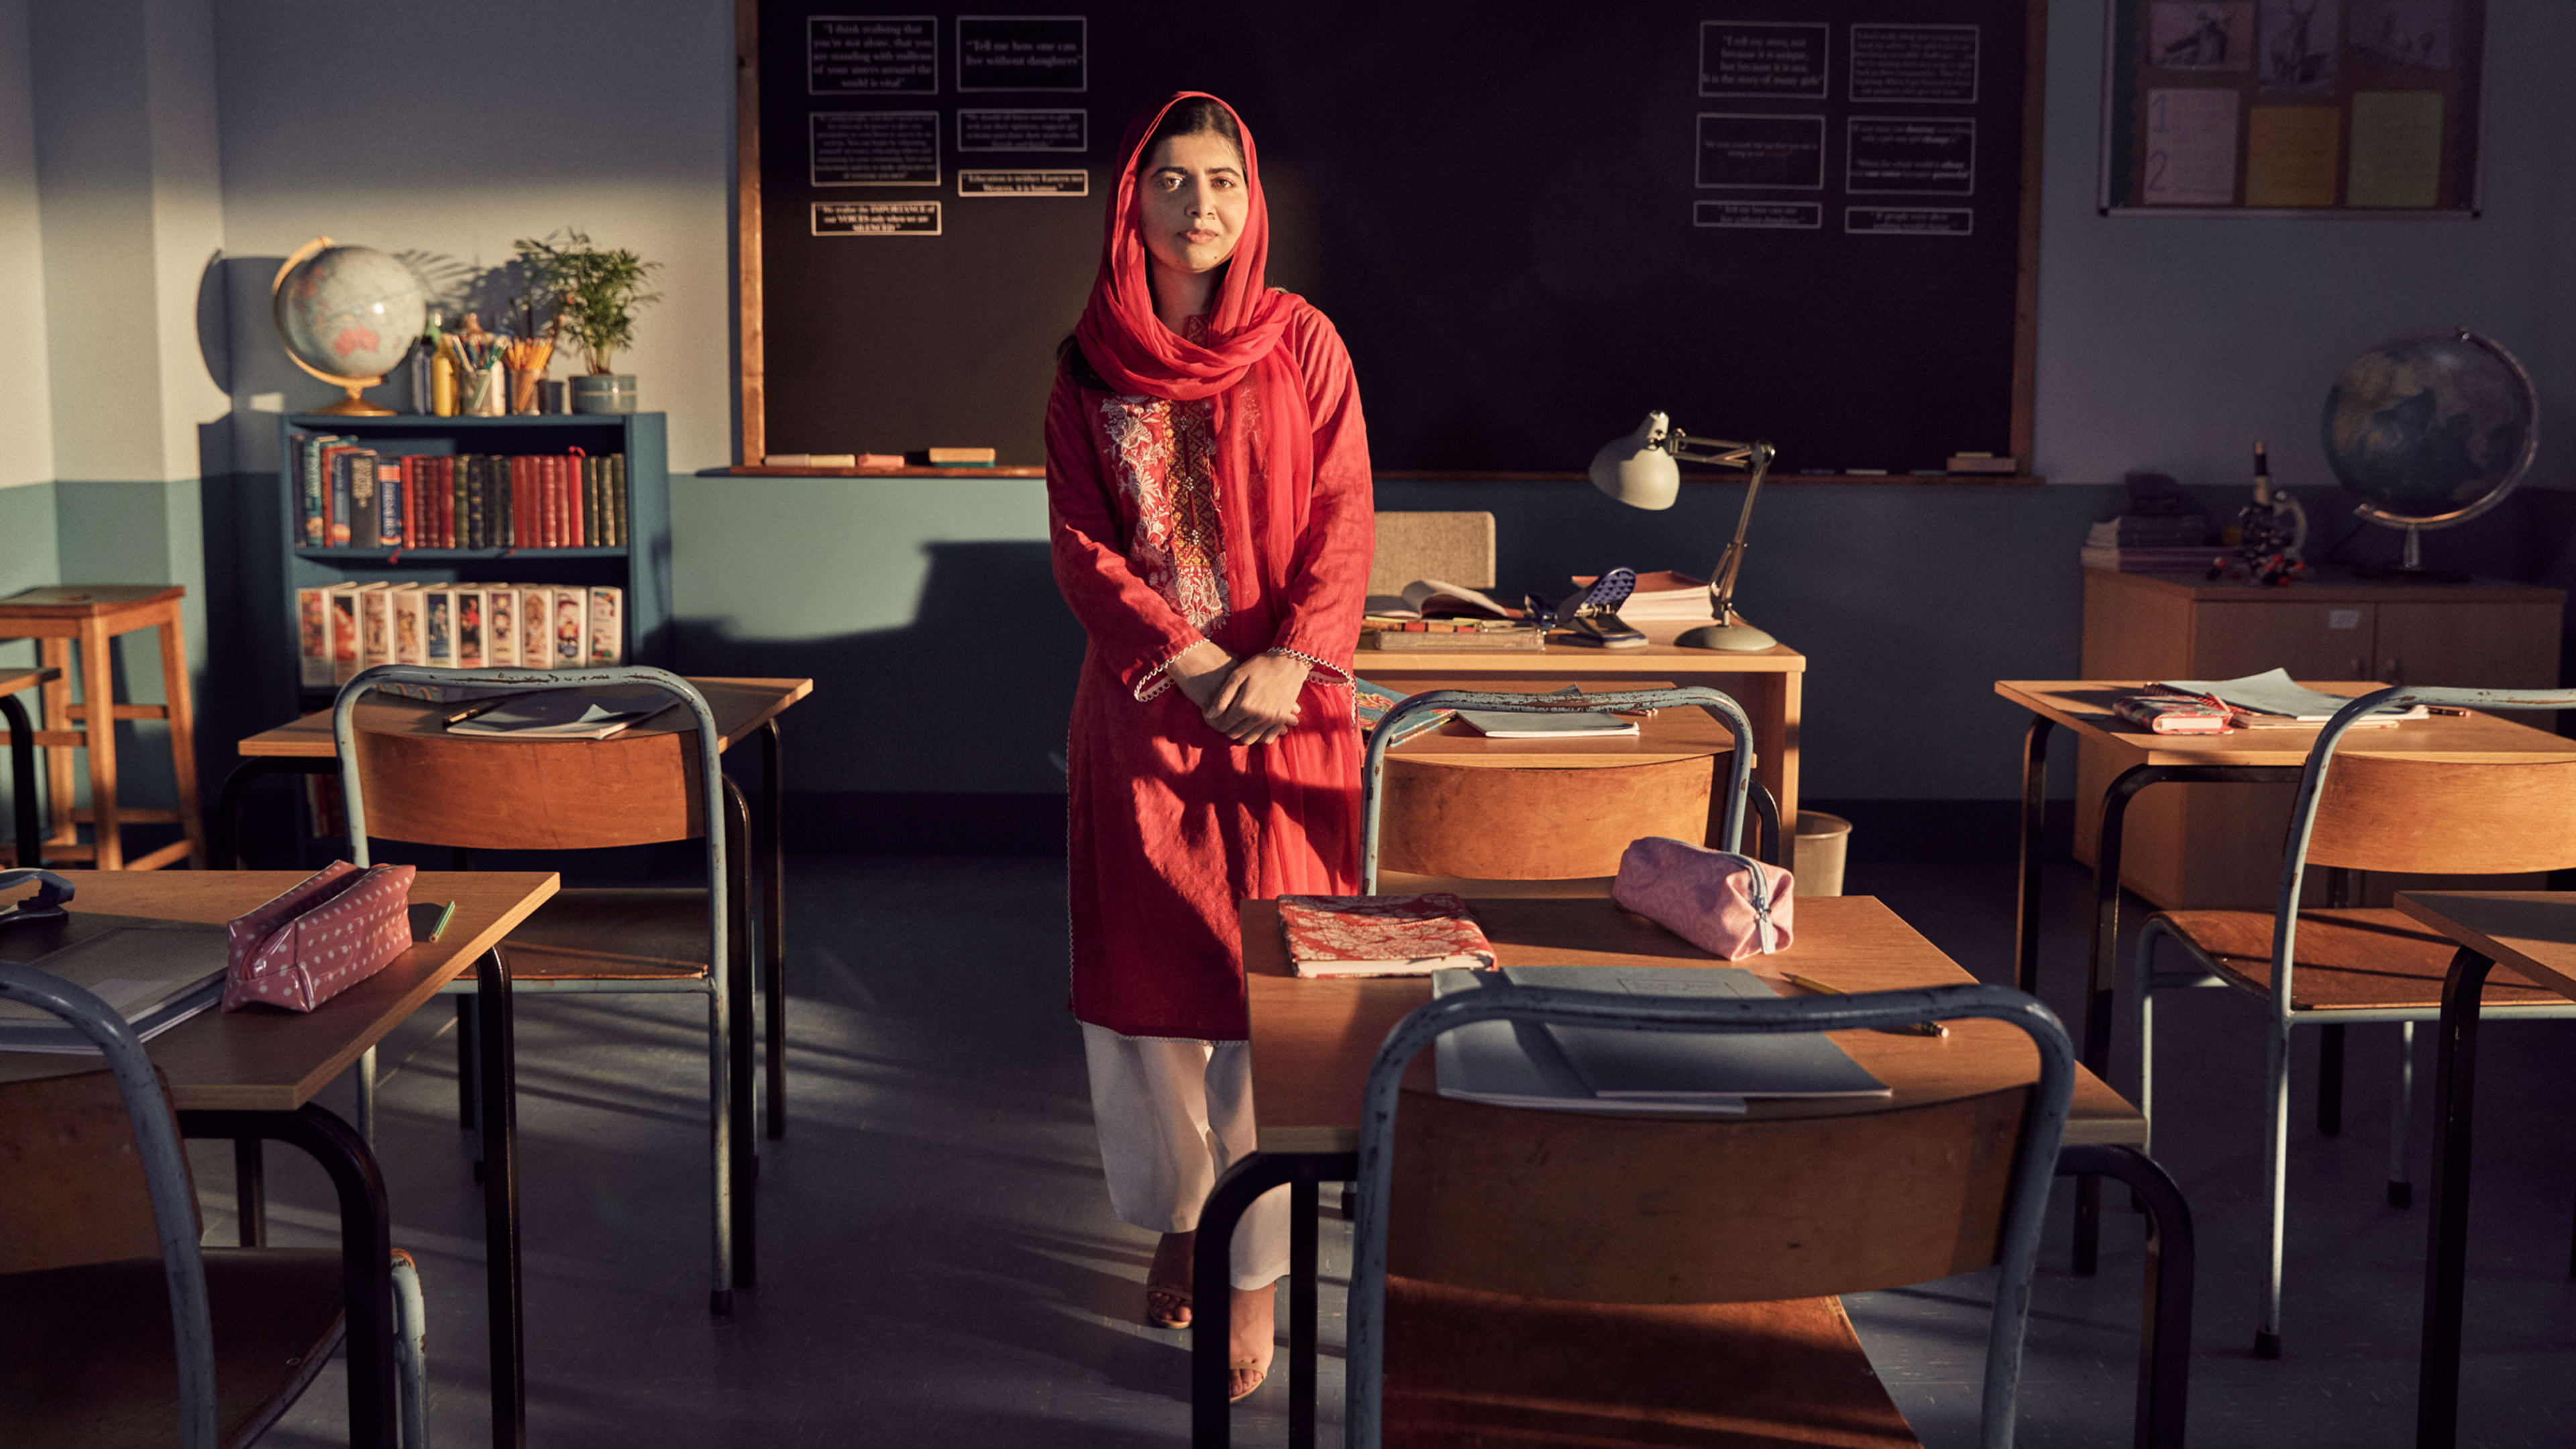 Malala lays out the 4 steps she takes to build a campaign for change